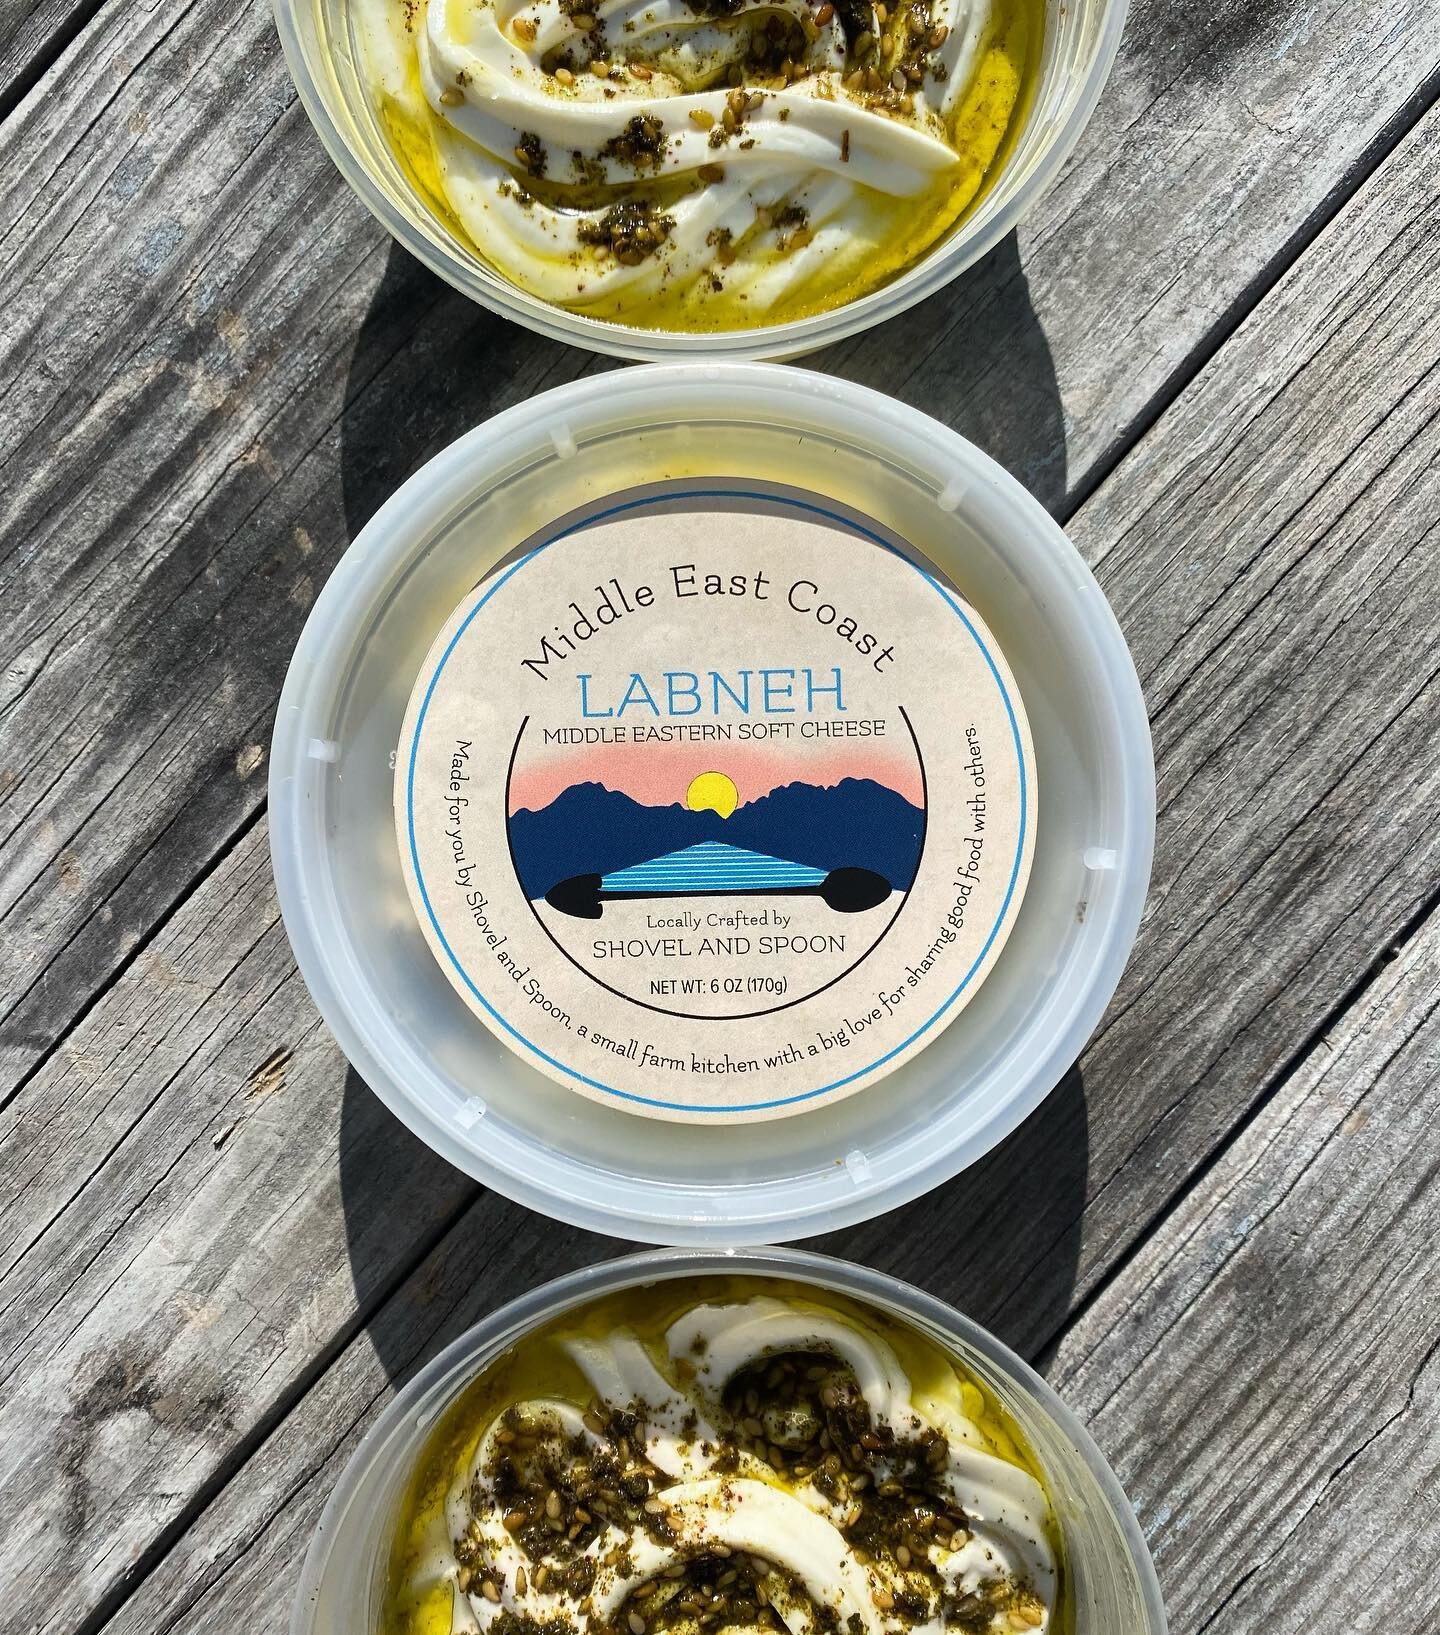 💥NEW PRODUCT ALERT💥 Another Middle Eastern classic: Labneh! This tangy, creamy soft cheese is made fresh with @mainemilkhouse organic yogurt from their pastured Jersey cows. Topped with olive oil and za&rsquo;atar, it&rsquo;s delicious with roasted